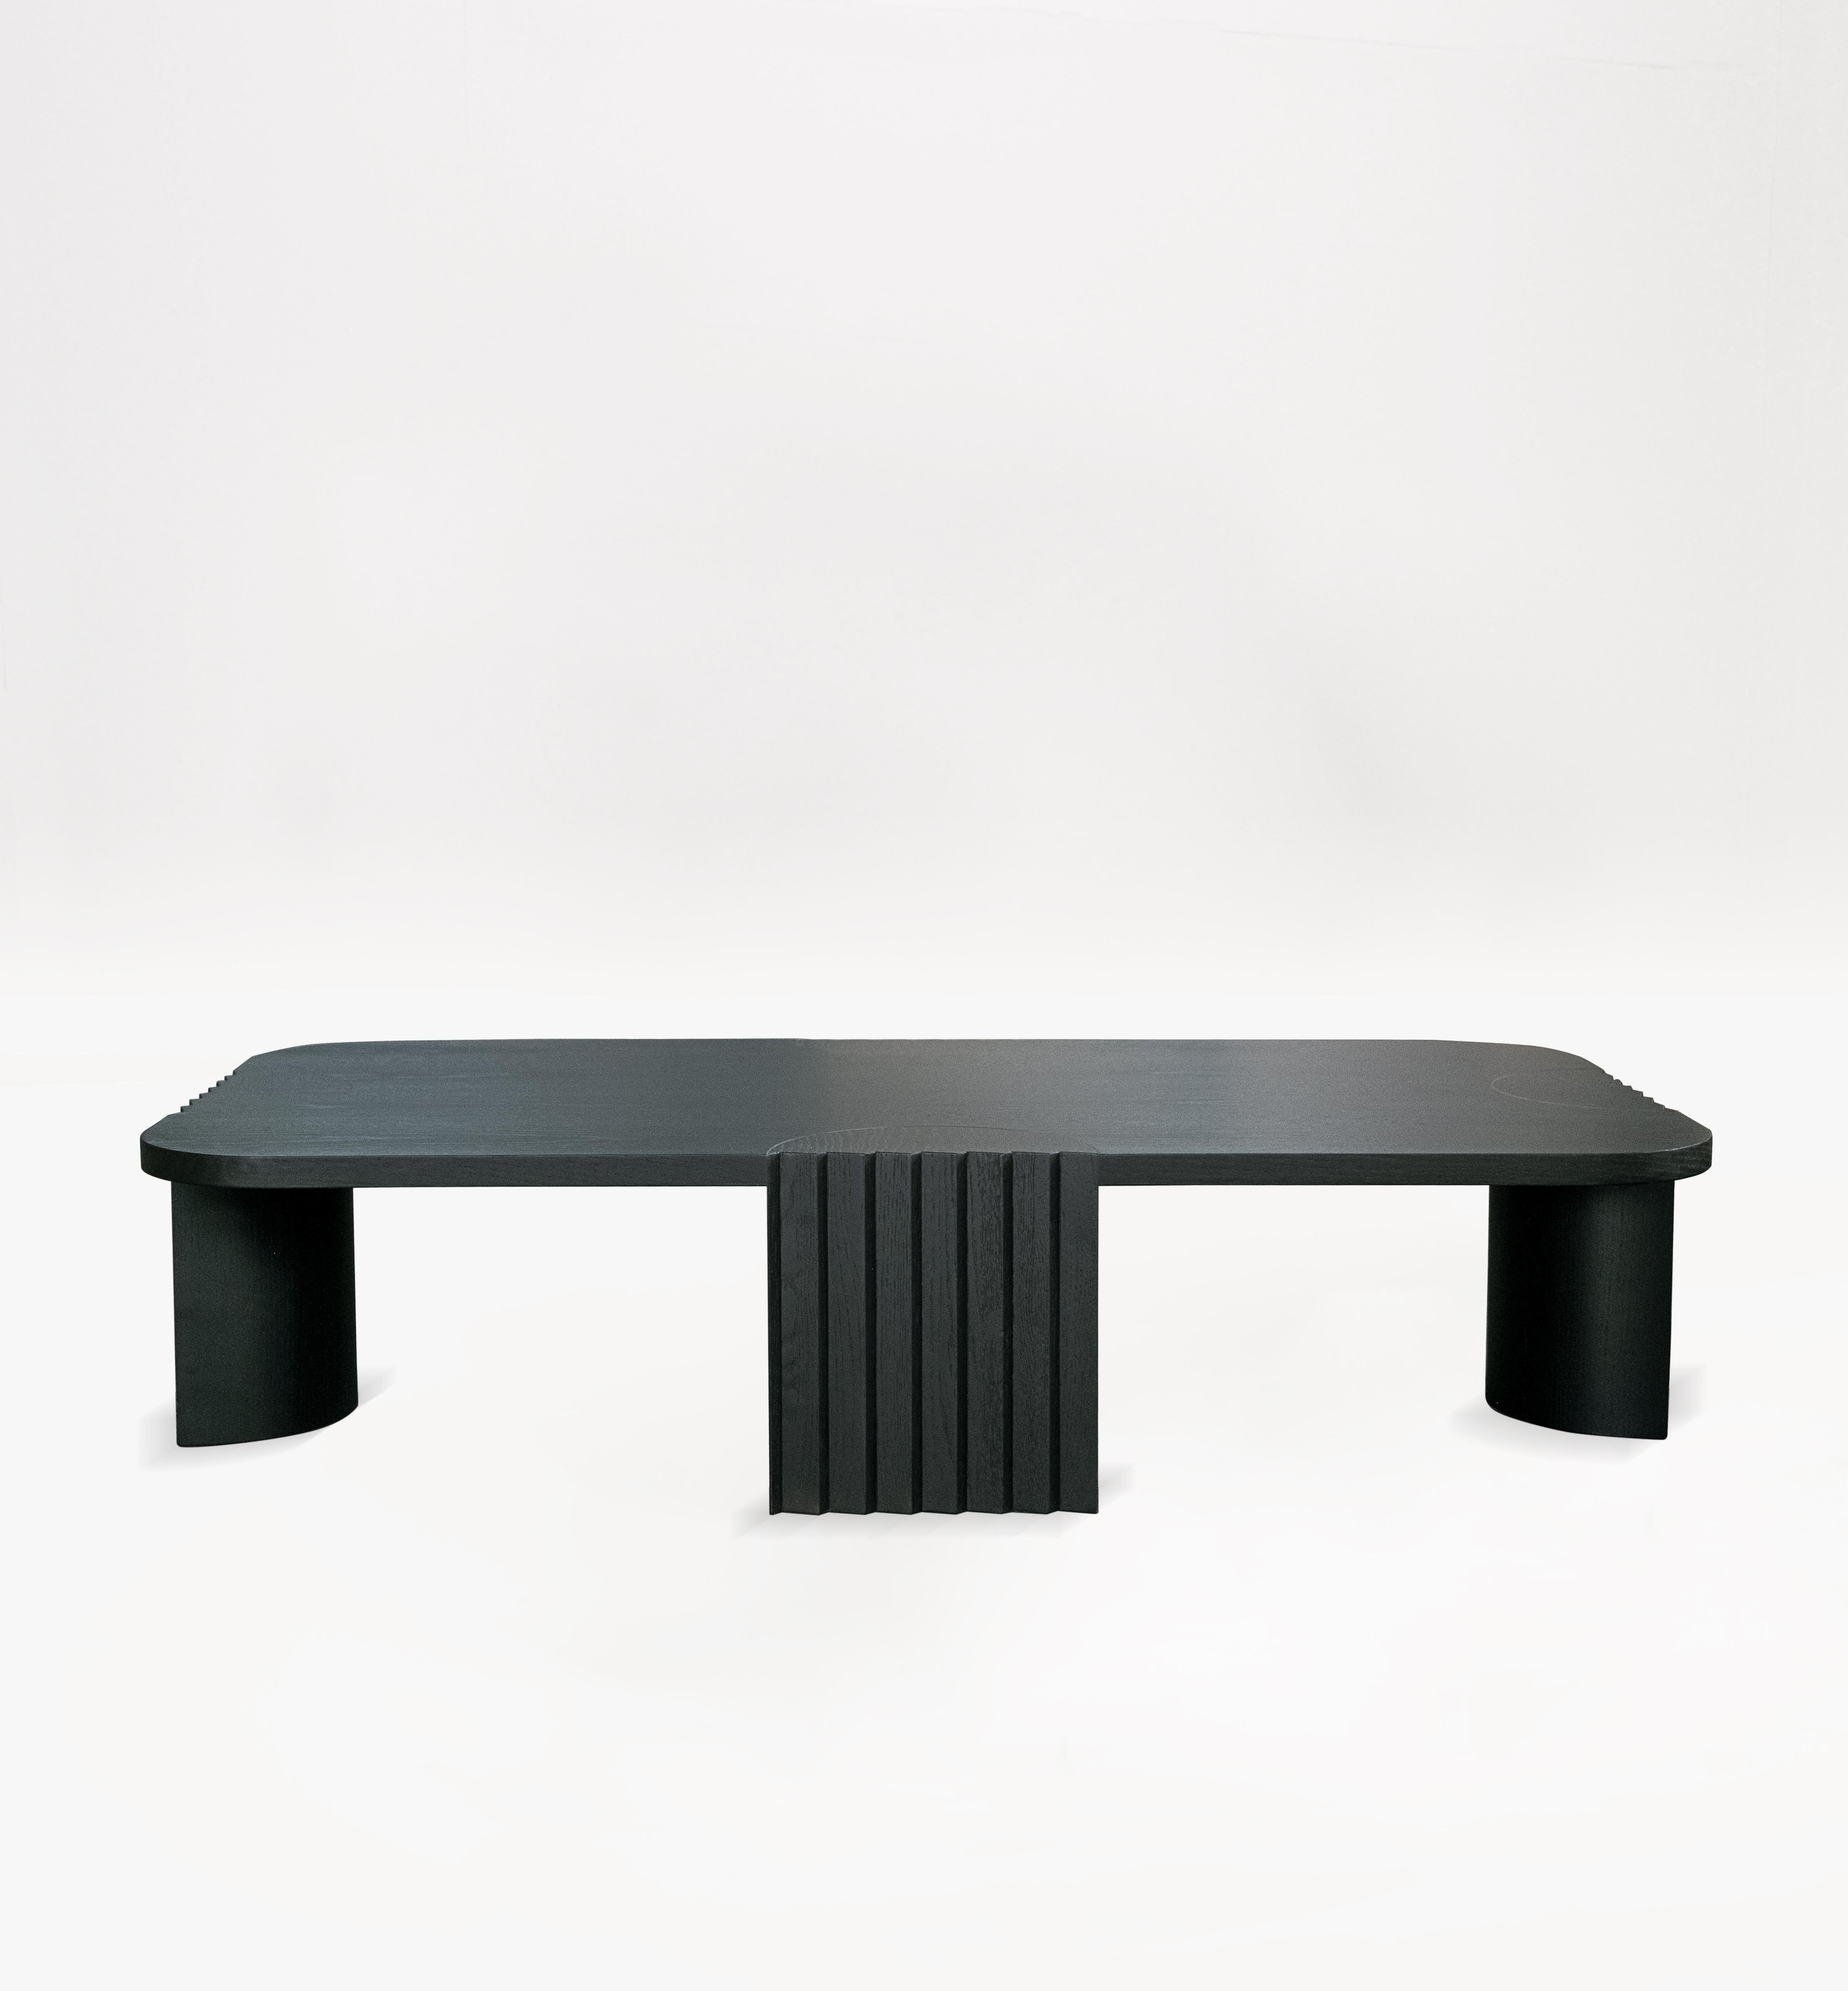 Unique black caravel table by Collector
Dimensions: W 150 x D 80 x H 35 cm
Materials: fabric, walnut wood 
Other materials available. 

Colombo, the Italian explorer, left from Portugal with 3 (as low tables are) CARAVELS to discover the